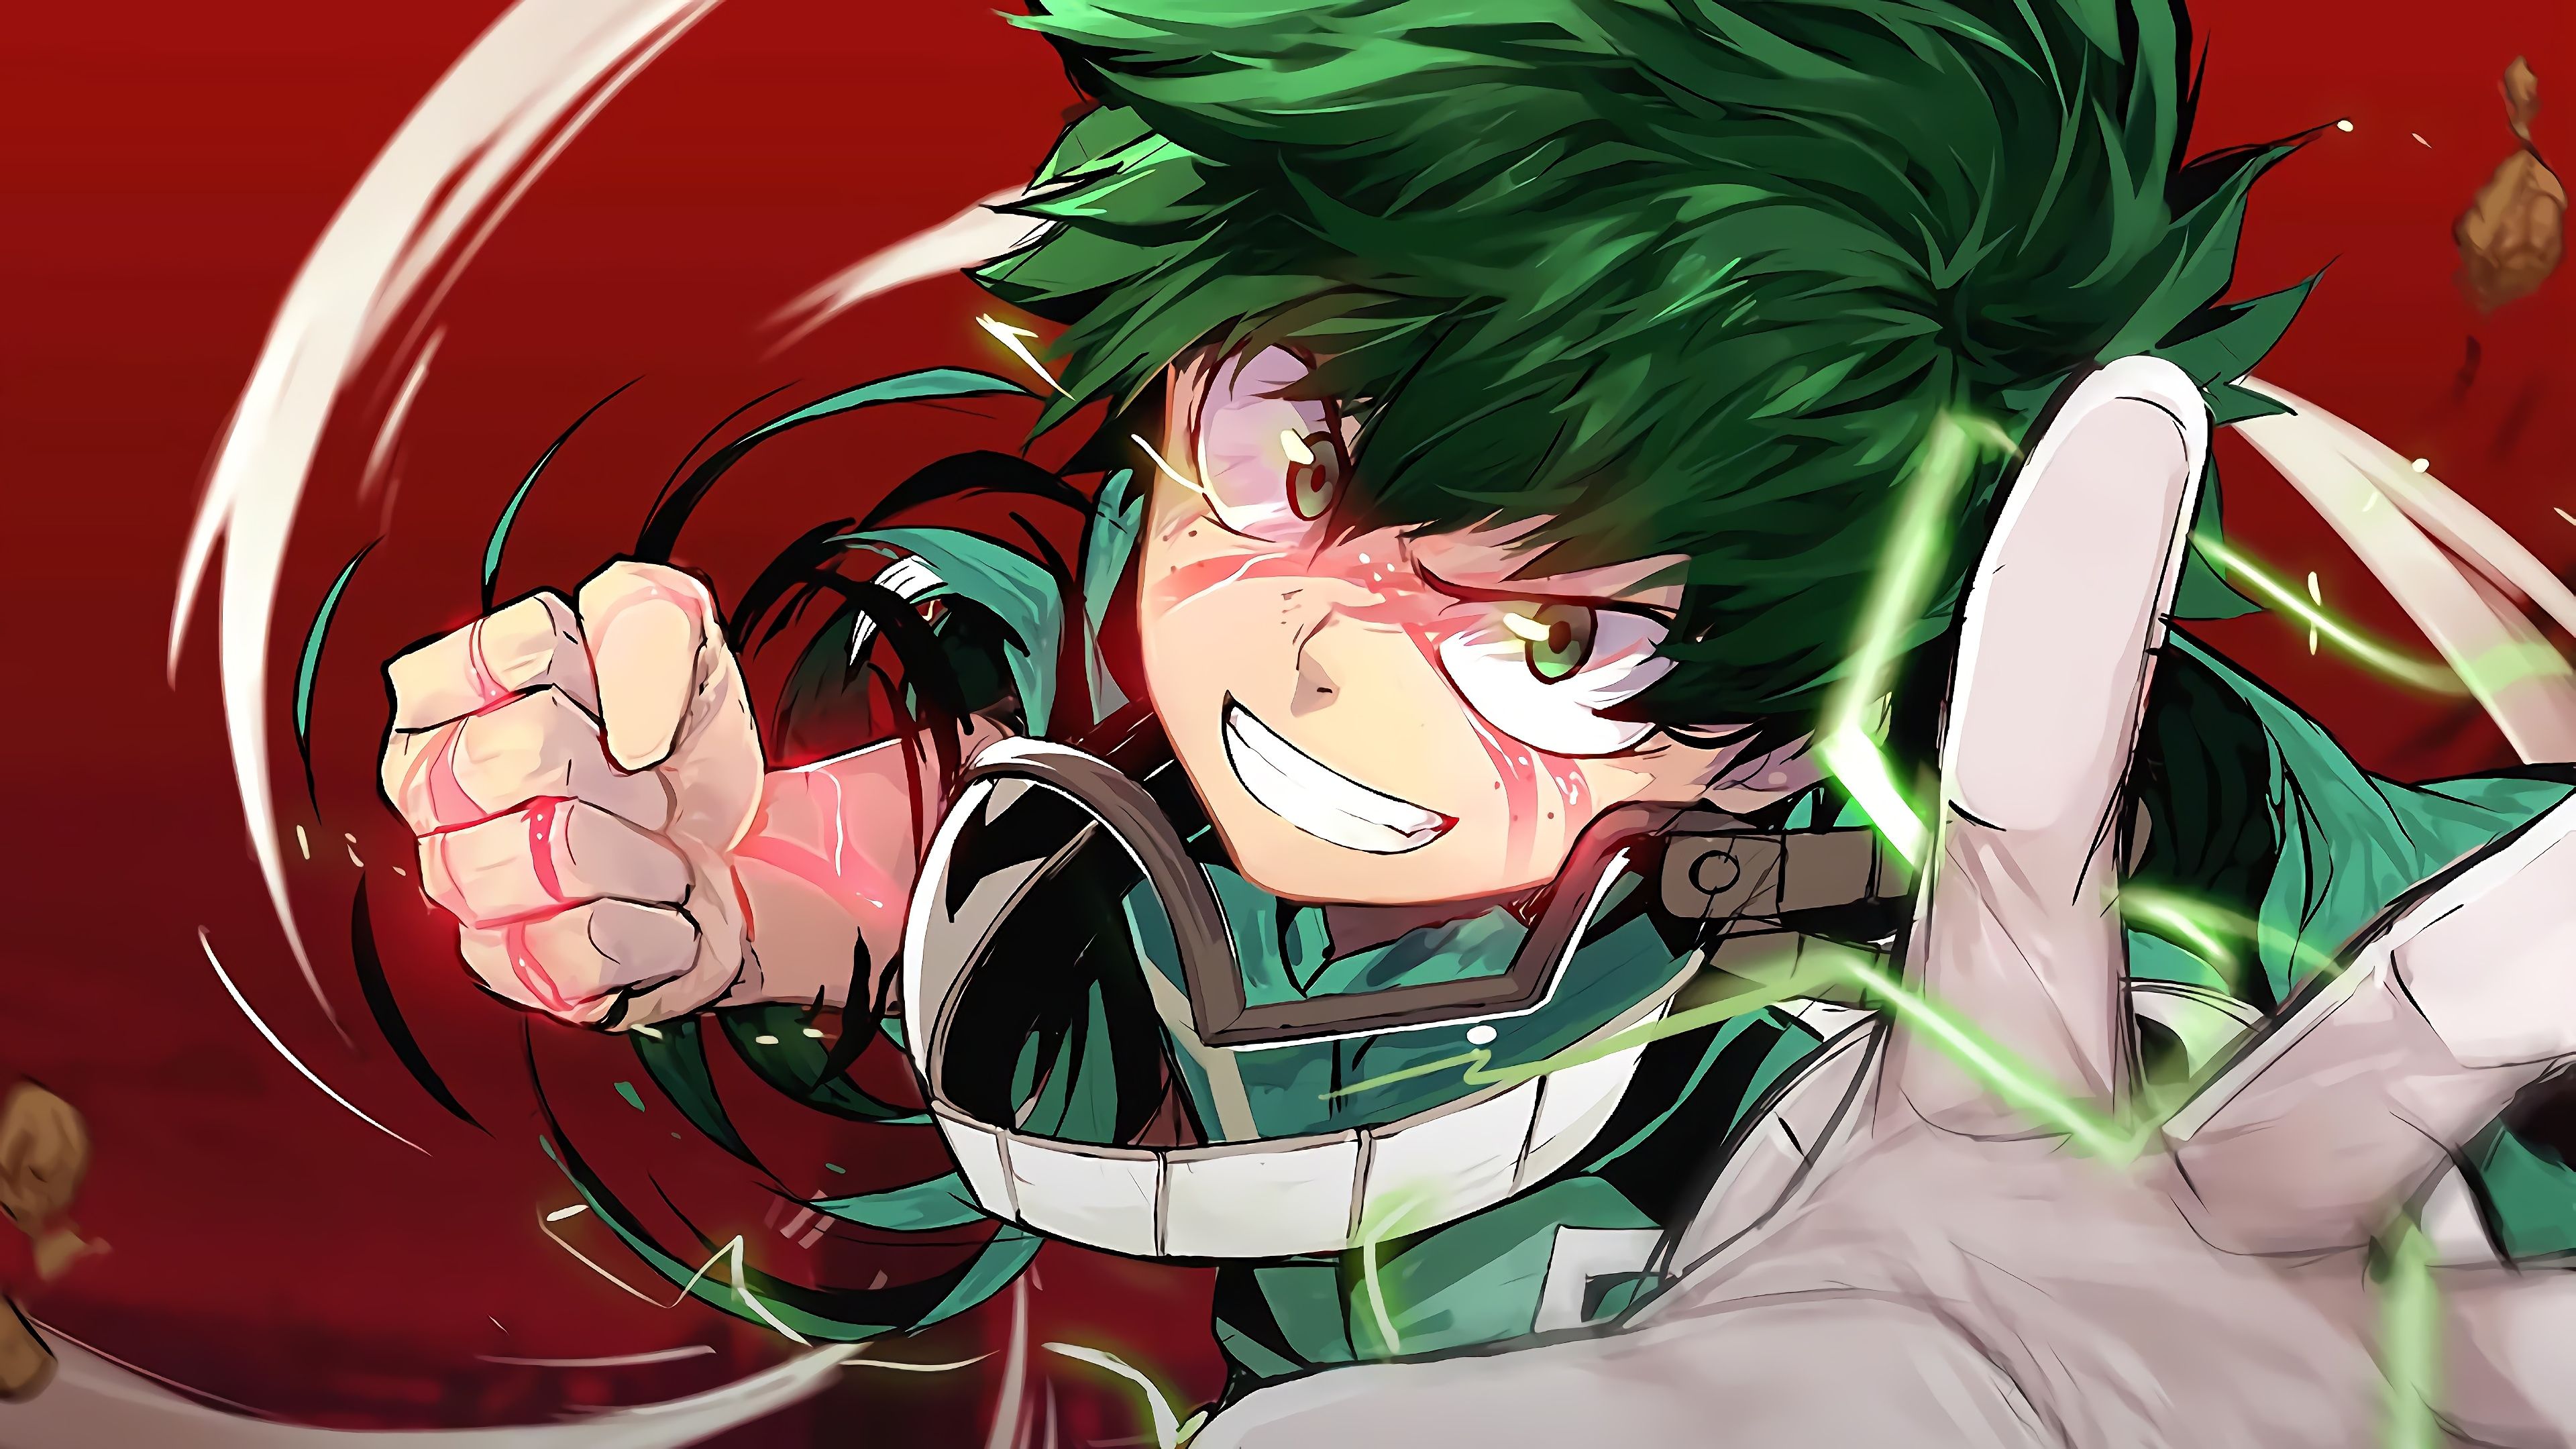 Tons of awesome anime My Hero Academia Deku wallpapers to download for free...